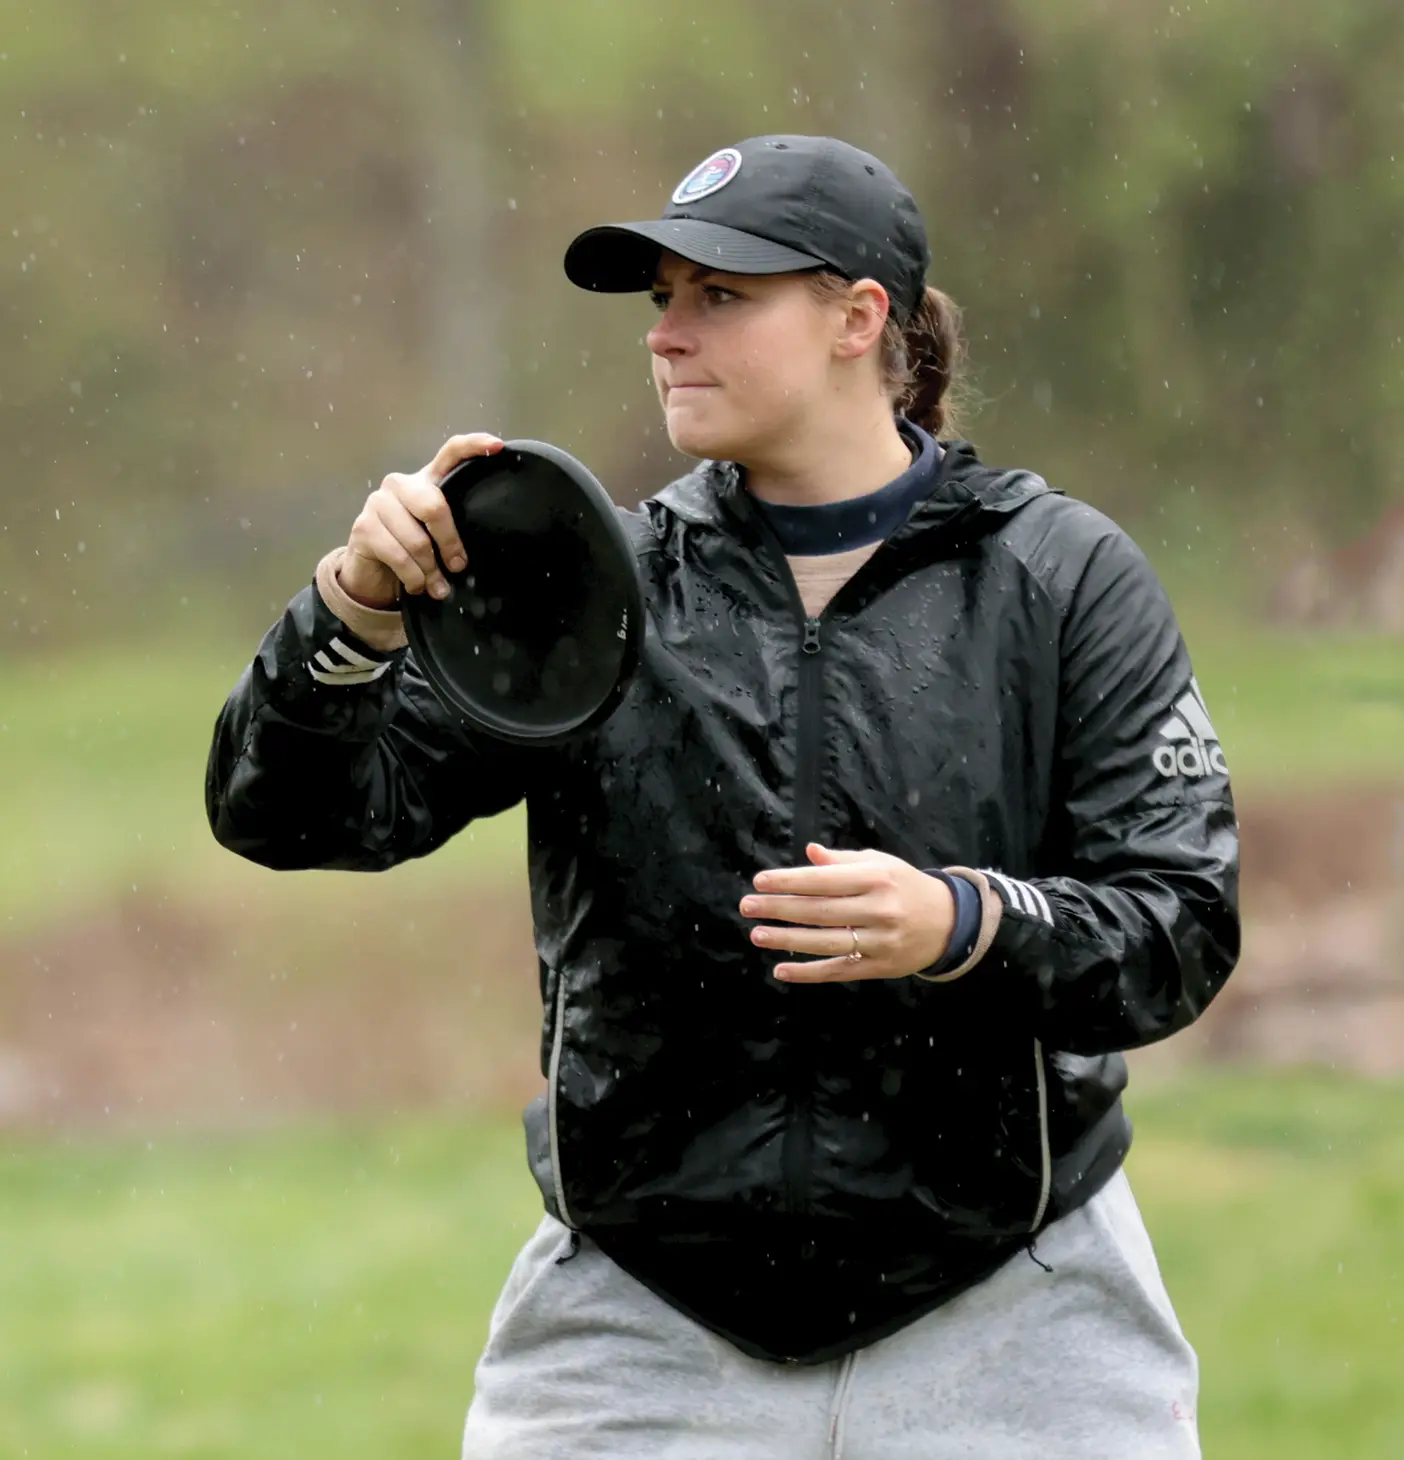 Tailey Rowley, national collegiate disc golf champion, prepares for a toss in the rain